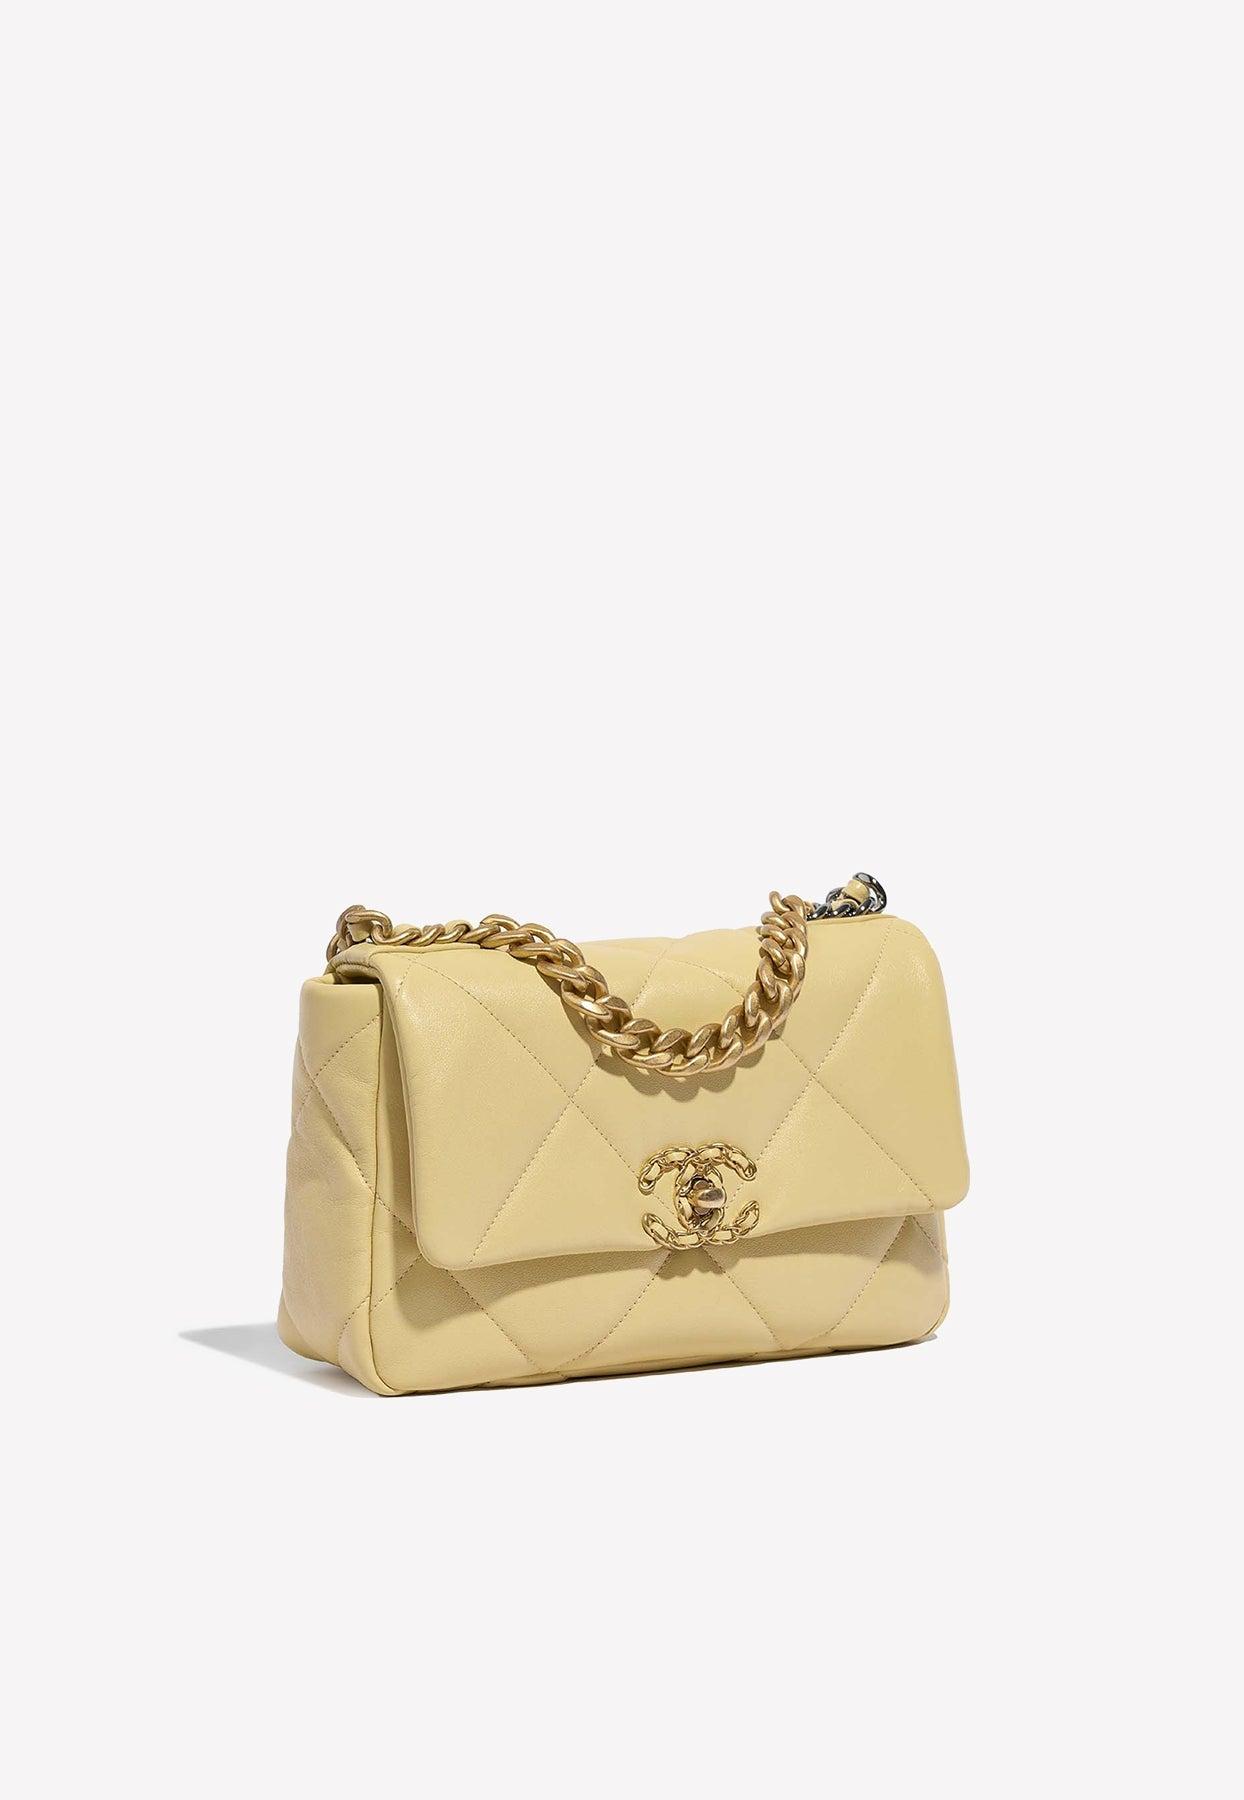 Chanel 19 Flap Bag In Pastel Yellow Lambskin With Gold Hardware